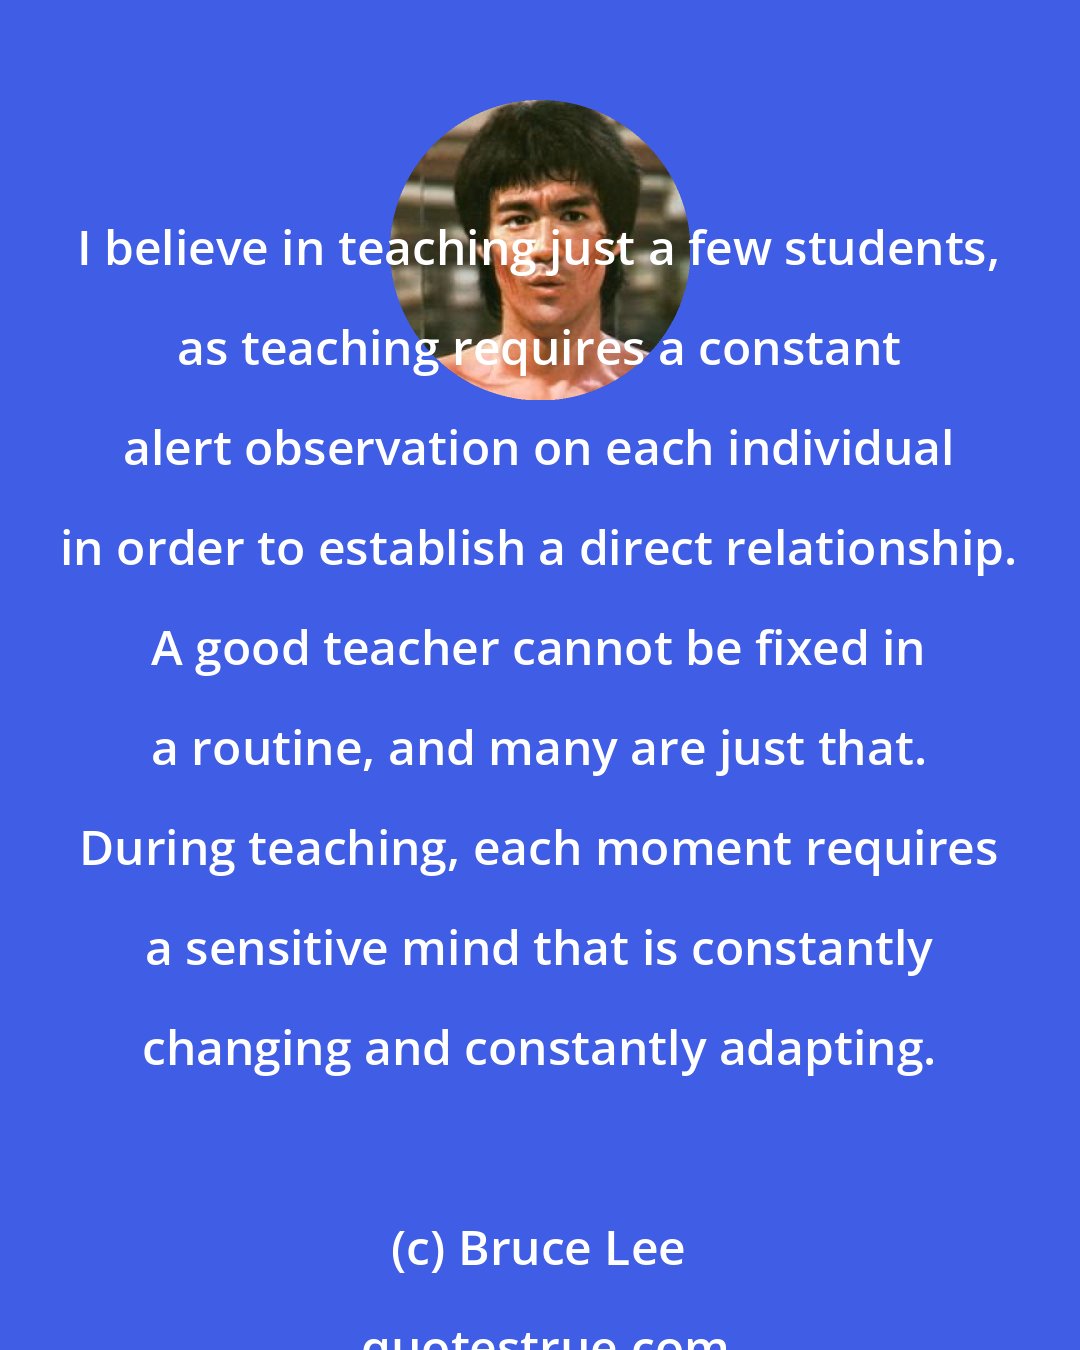 Bruce Lee: I believe in teaching just a few students, as teaching requires a constant alert observation on each individual in order to establish a direct relationship. A good teacher cannot be fixed in a routine, and many are just that. During teaching, each moment requires a sensitive mind that is constantly changing and constantly adapting.